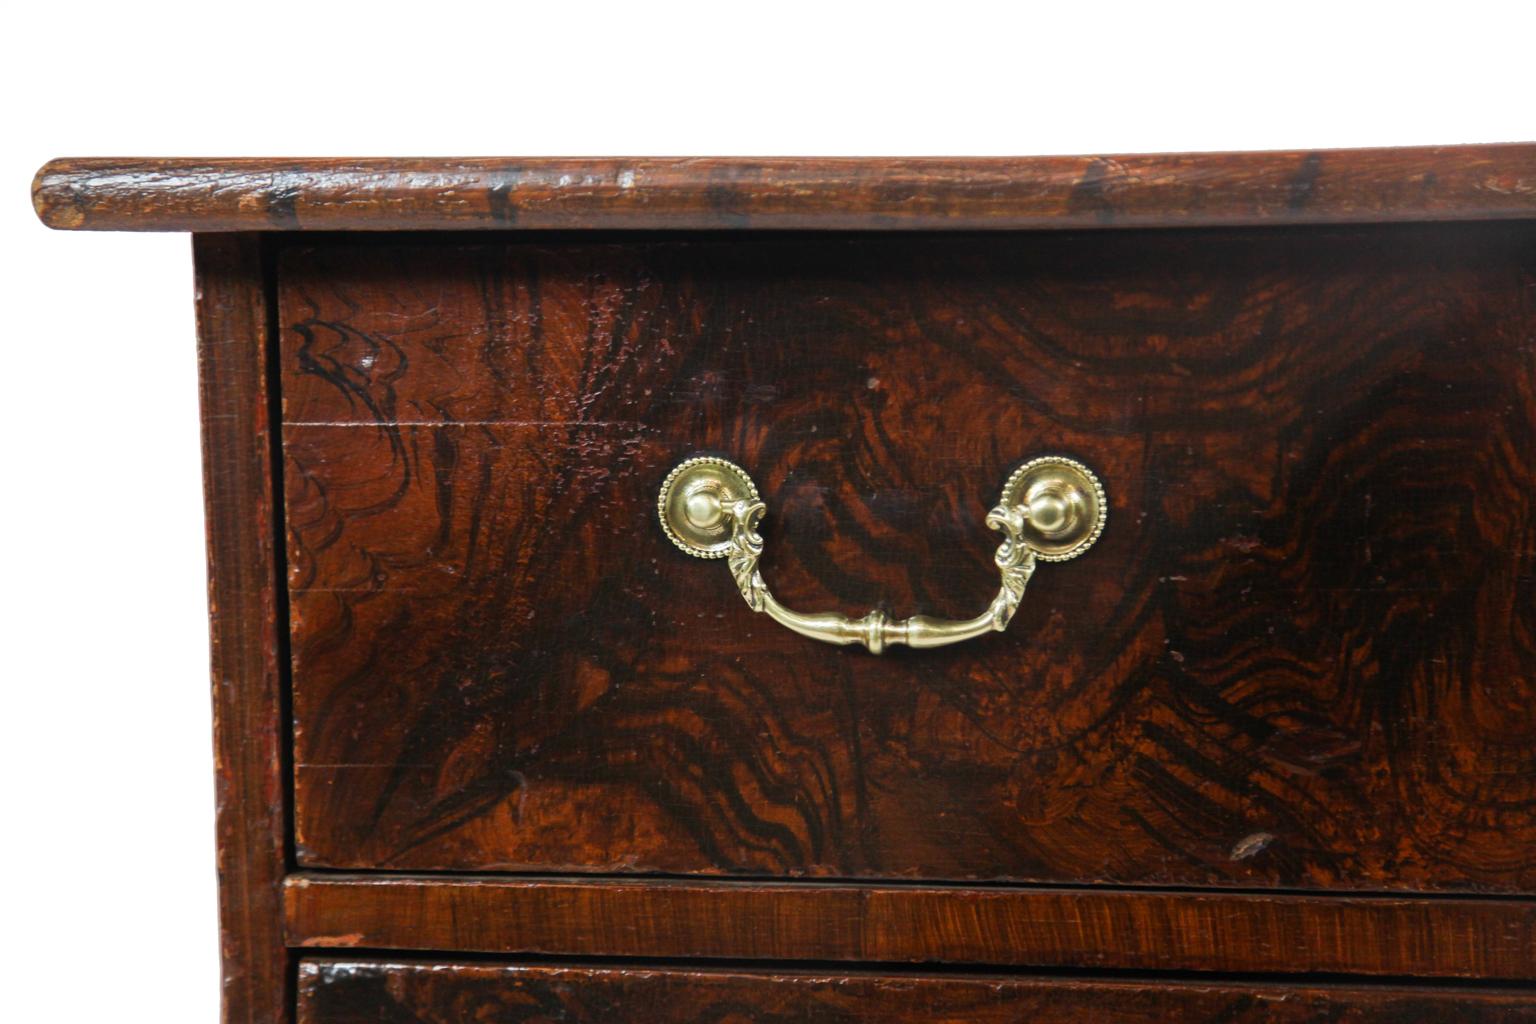 19th century French grain painted bow front chest, the top with simulated wood grain and crossbanding, over three drawers with simulated burl grain, swan neck brass pulls and vertical escutcheons, on cabriole legs with splayed feet.